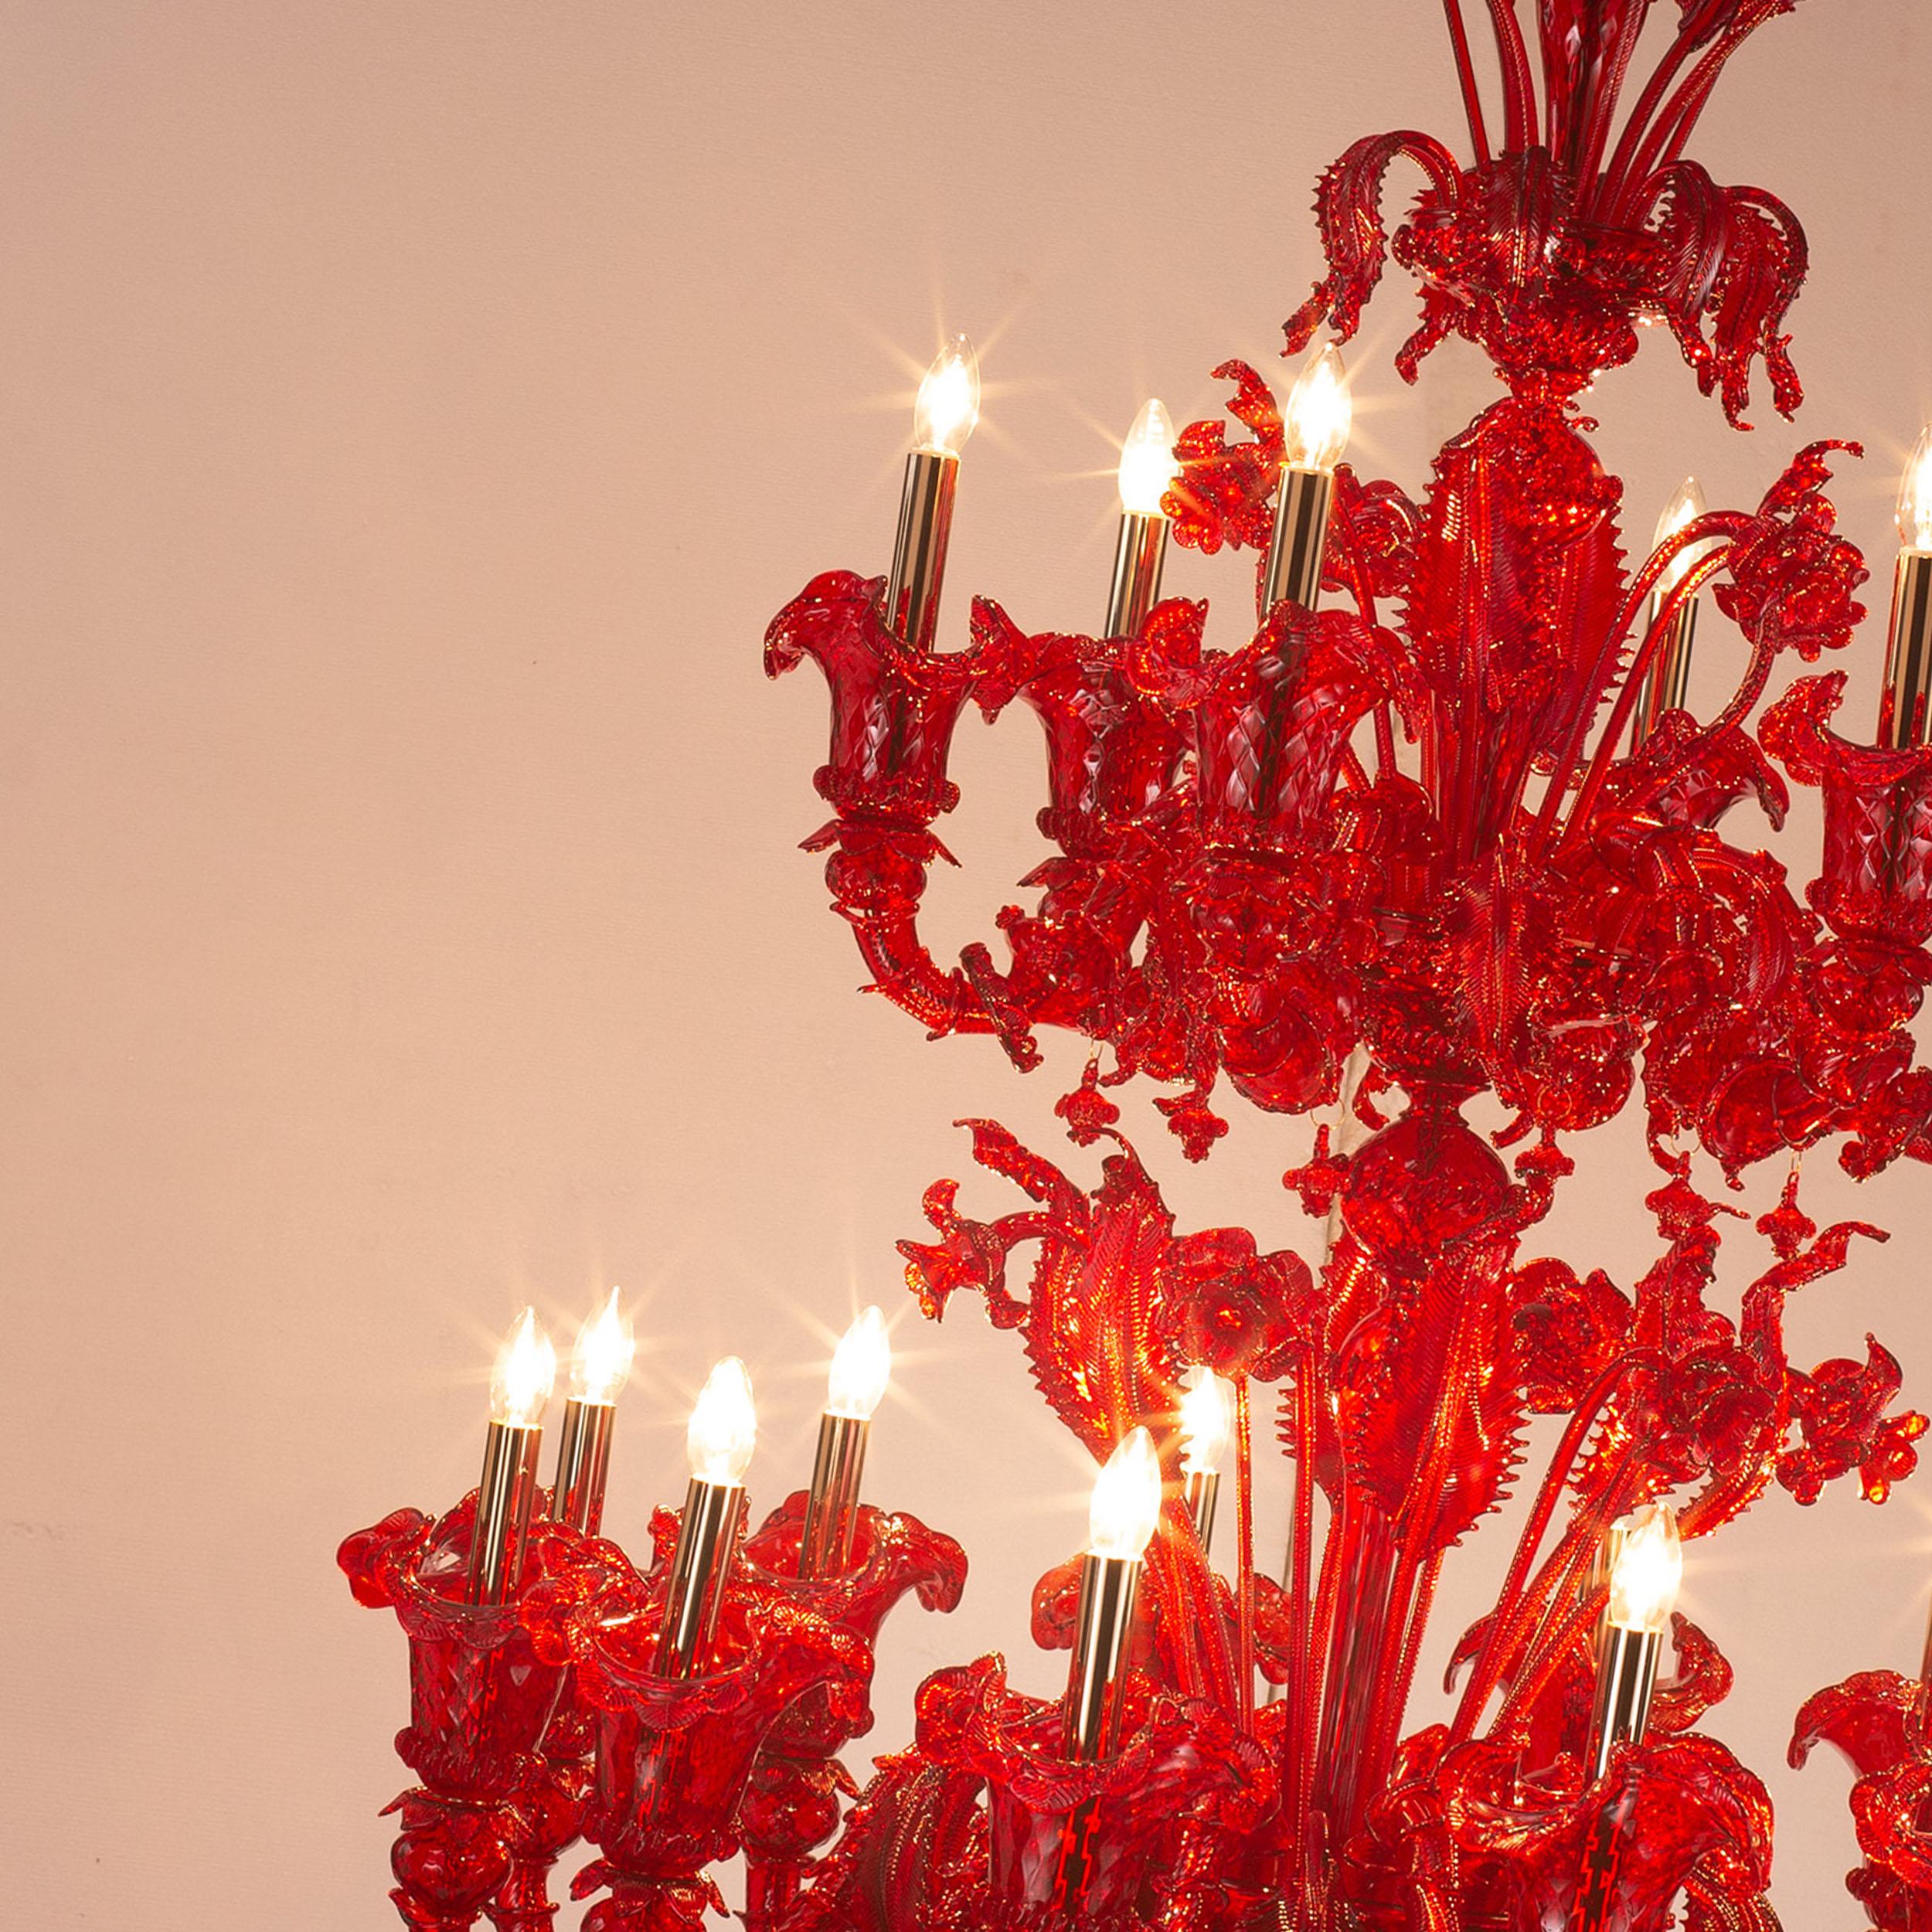 Rezzonico Chandelier, 12+6 arms, multi-tiered, red Murano glass by Multiforme For Sale 7